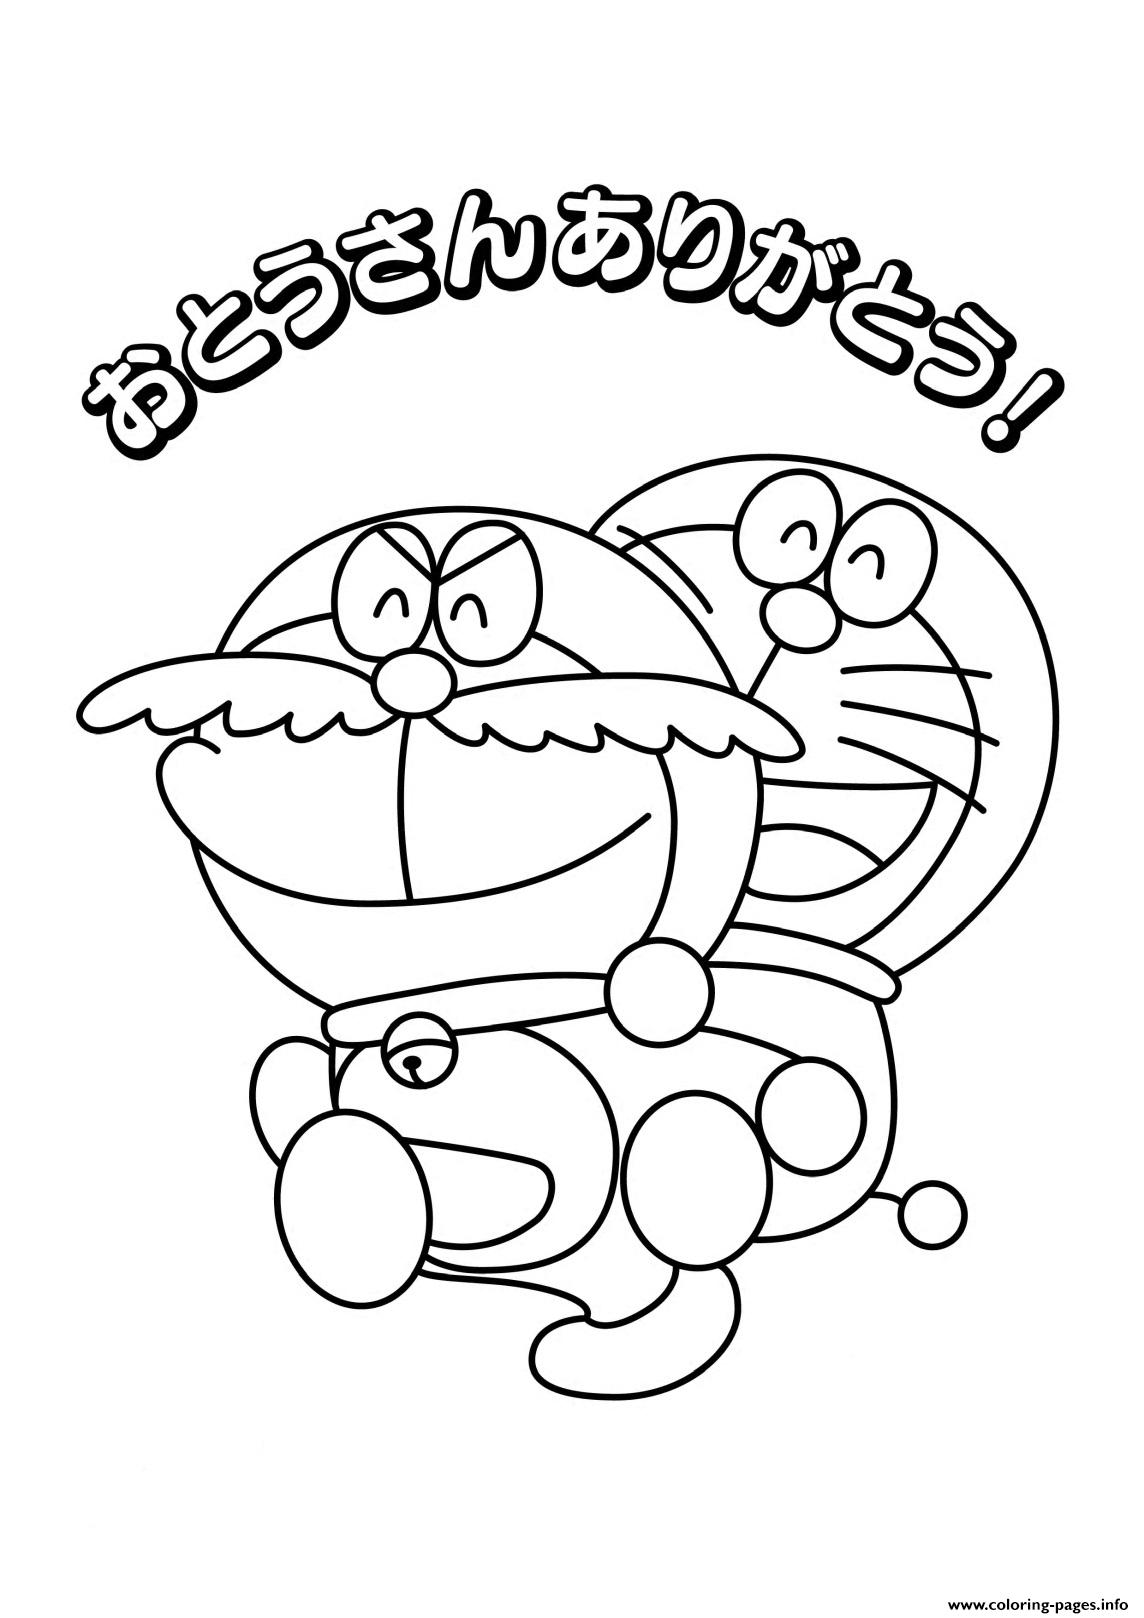 Doraemon With Mustache 62e1 Coloring Pages Printable